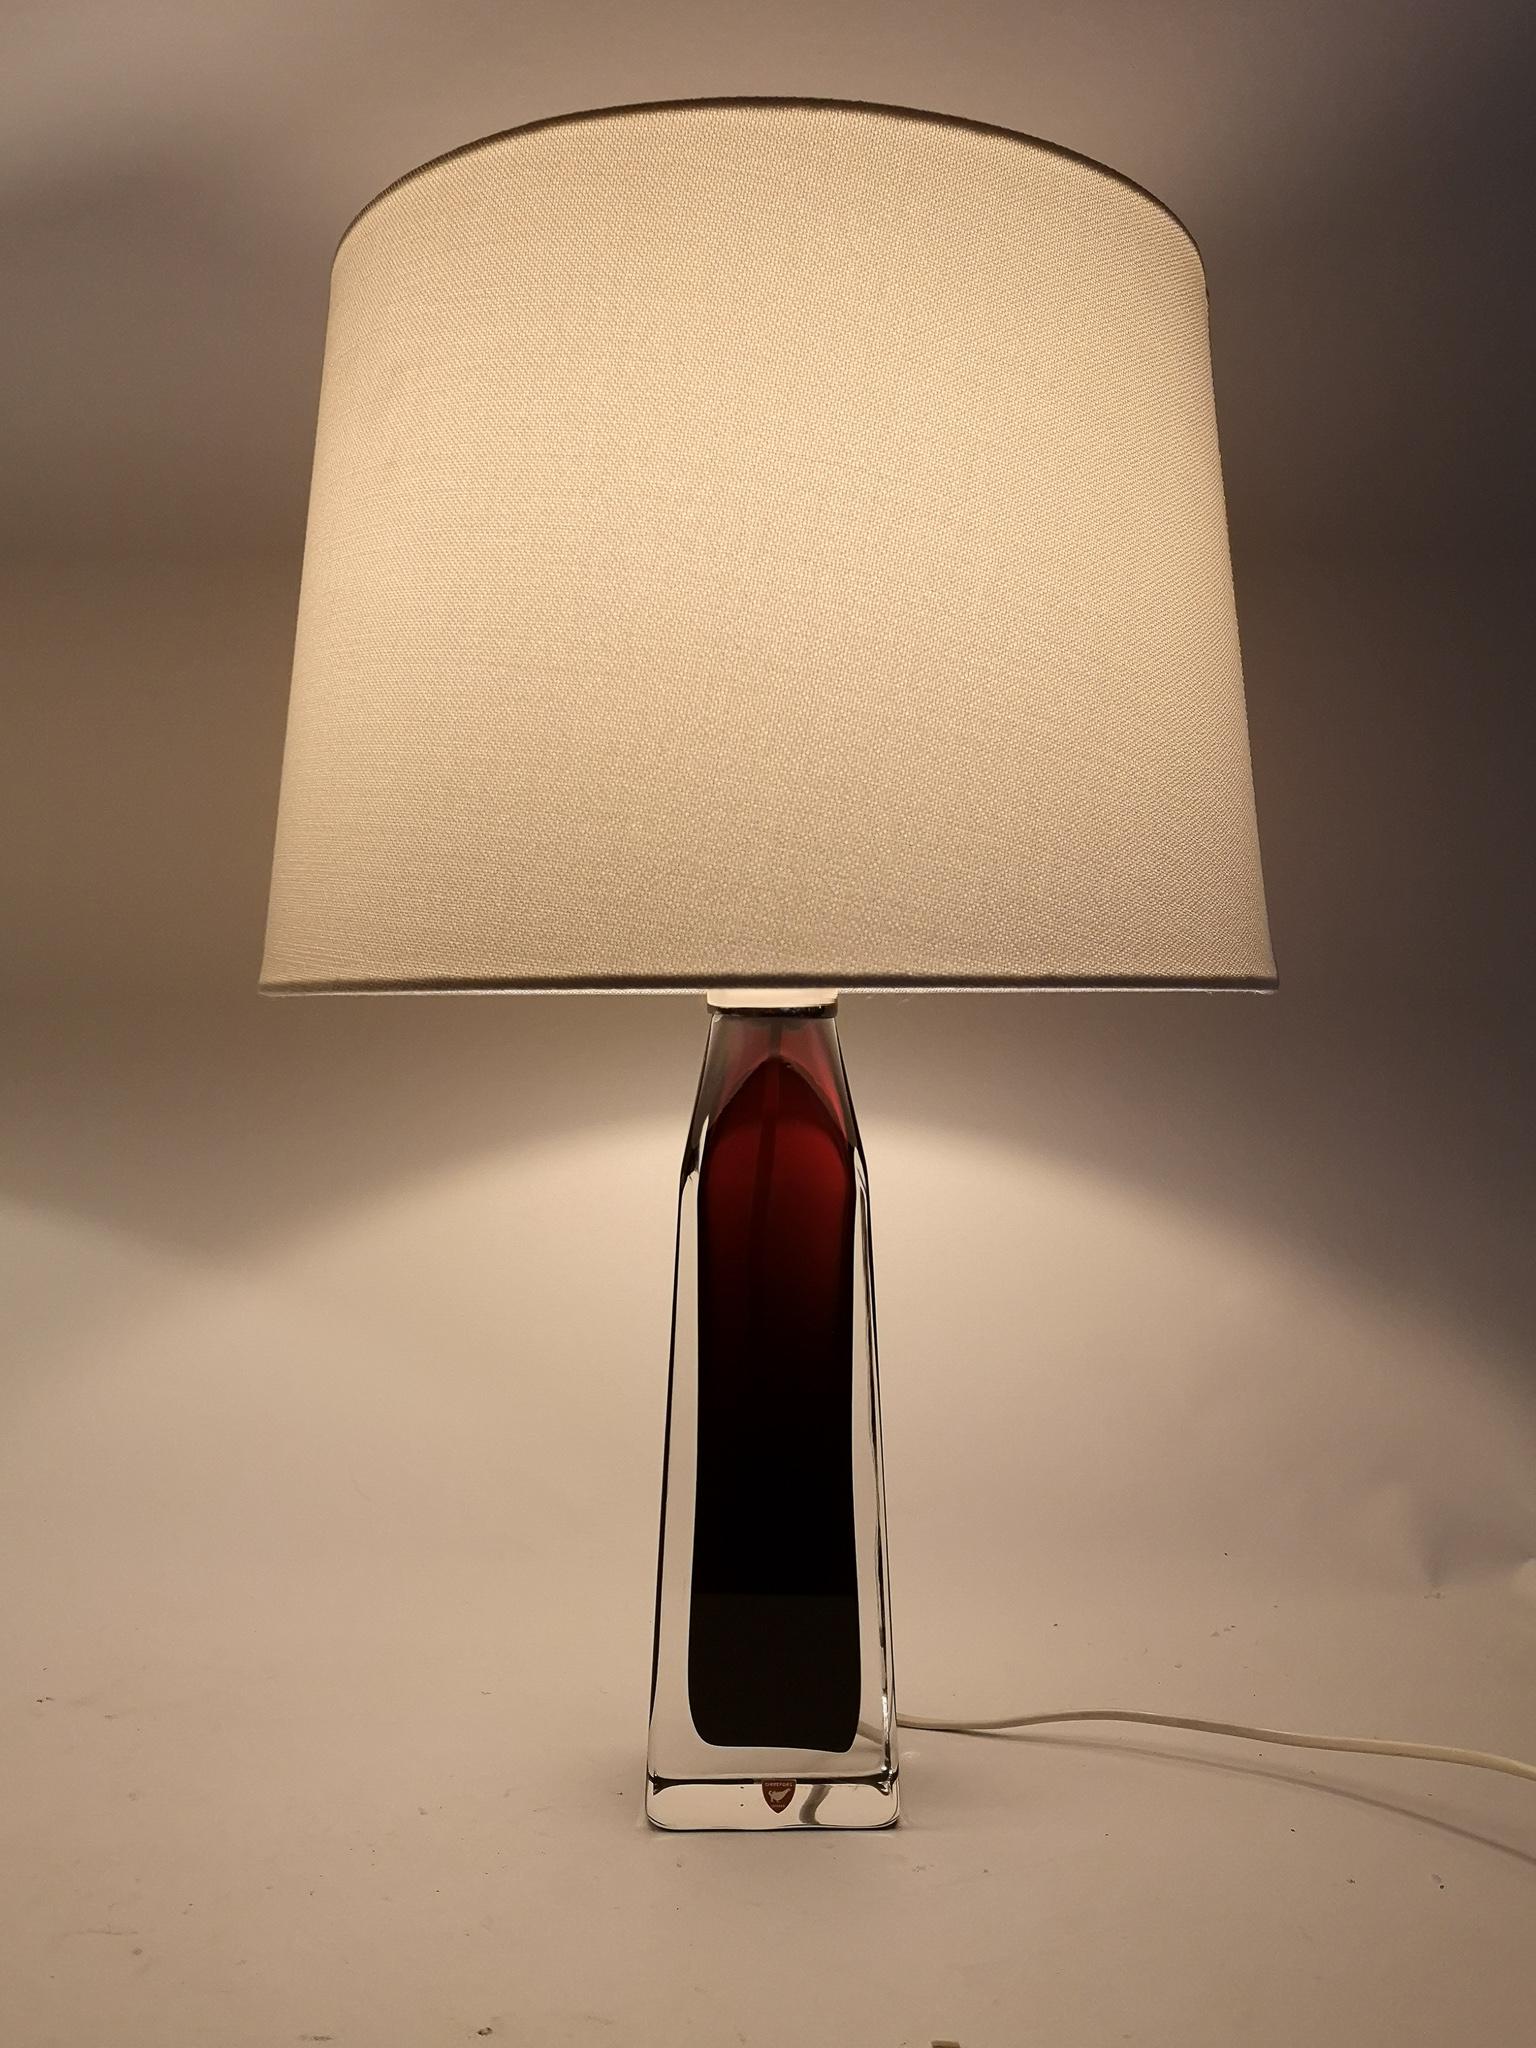 Mid-20th Century Midcentury Table Lamps by Carl Fagerlund for Orrefors Sweden RD 1884